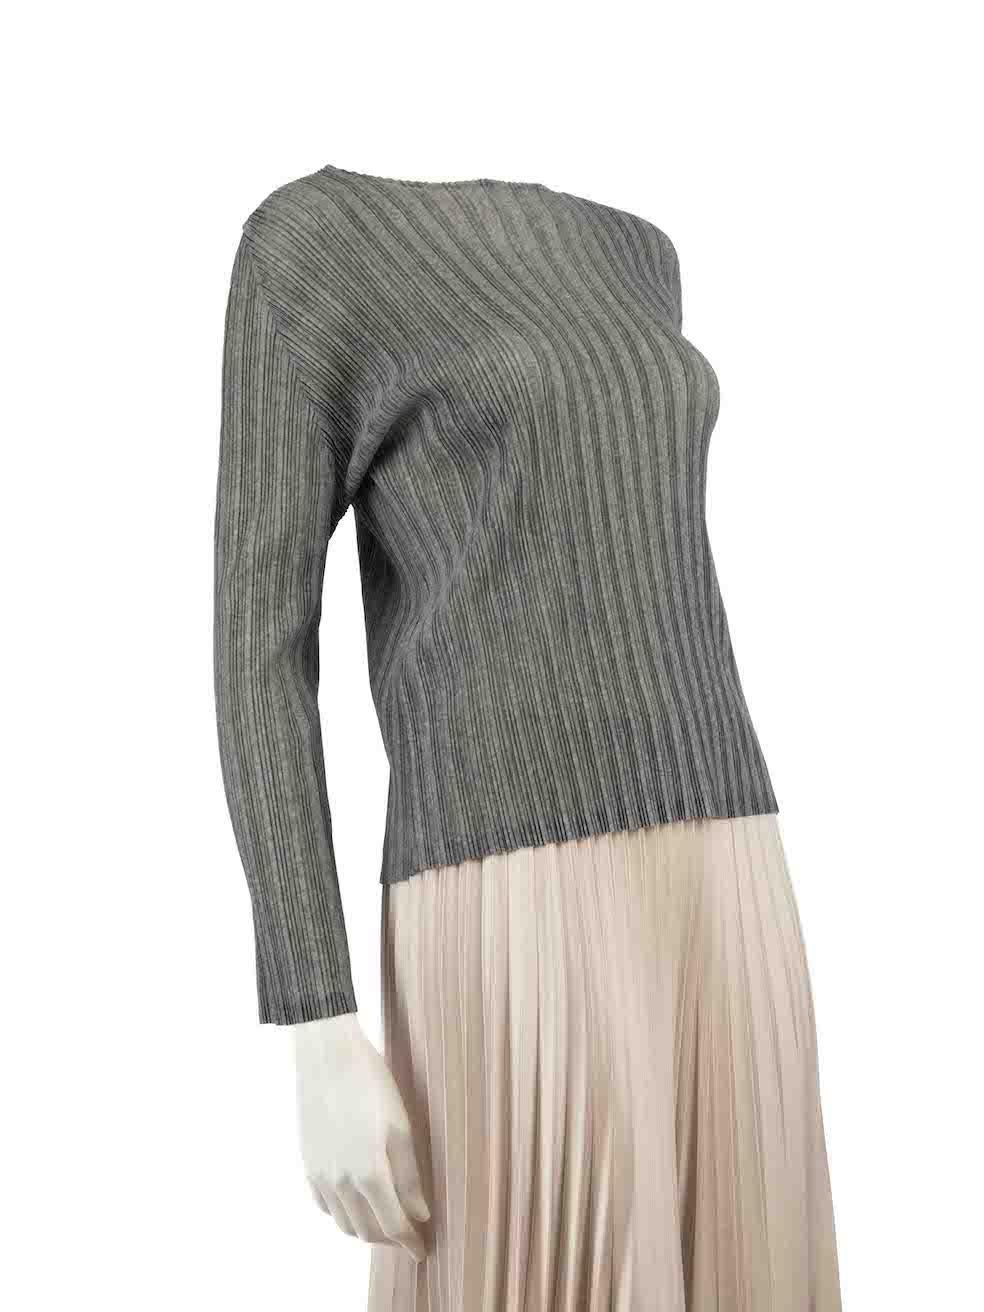 CONDITION is Never worn. No visible wear to top is evident on this new Pleats Please by Issey Miyake designer resale item. Please note that the composition label is written in Chinese.
 
 
 
 Details
 
 
 Grey
 
 Polyester
 
 Long sleeves top
 
